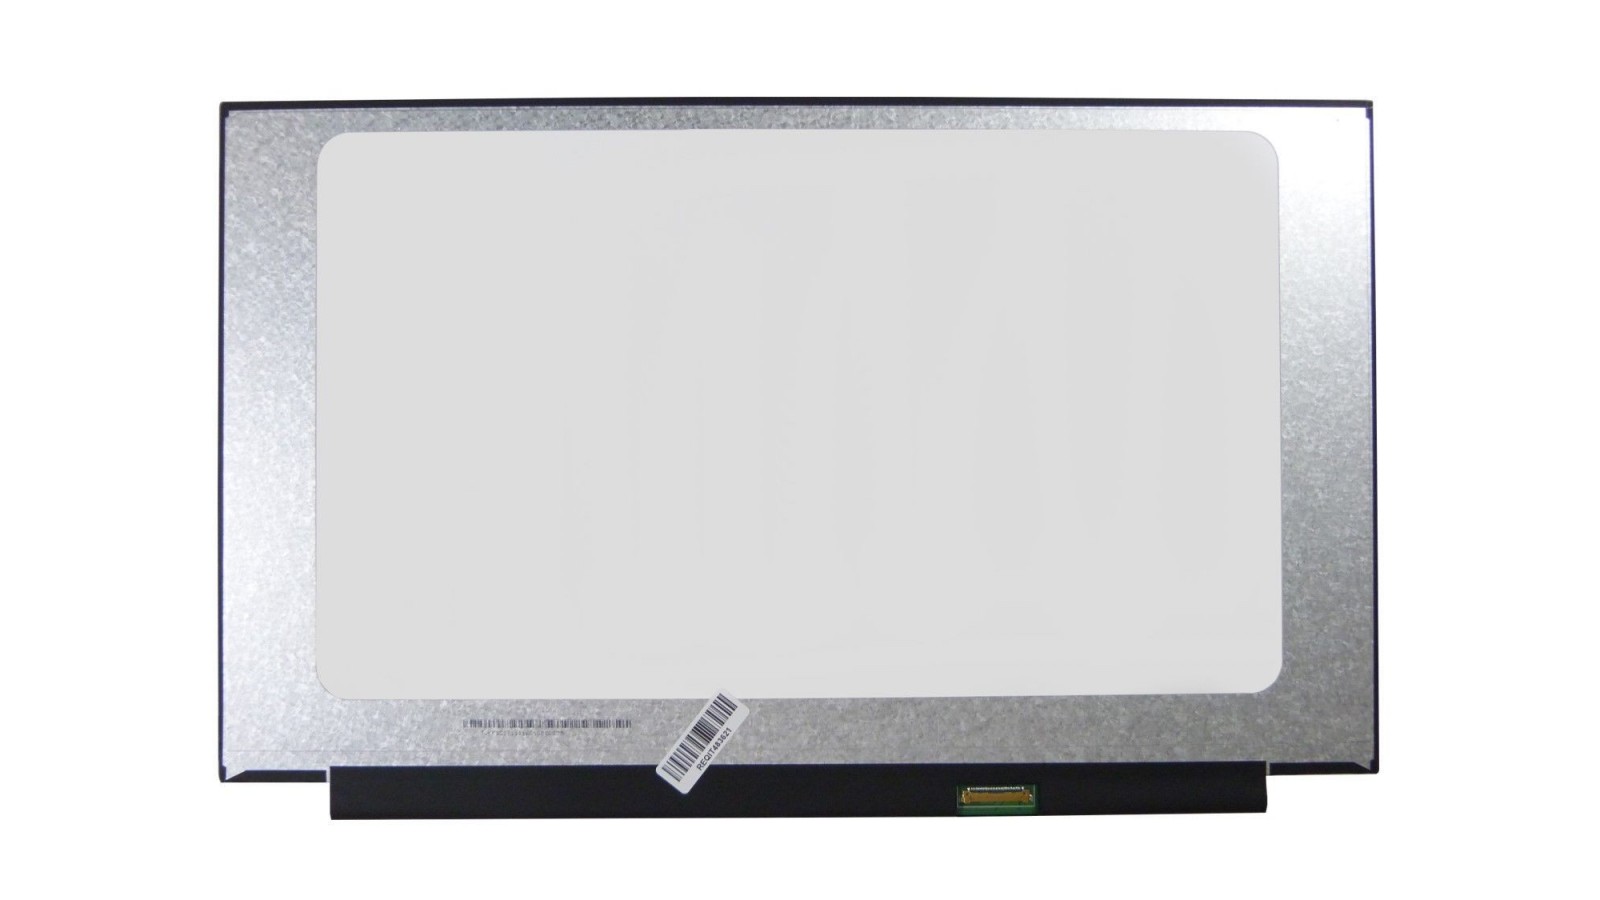 Display LCD Schermo 15,6 Led NT156FHM-N62 V8.0 Full Hd connettore 30 pin